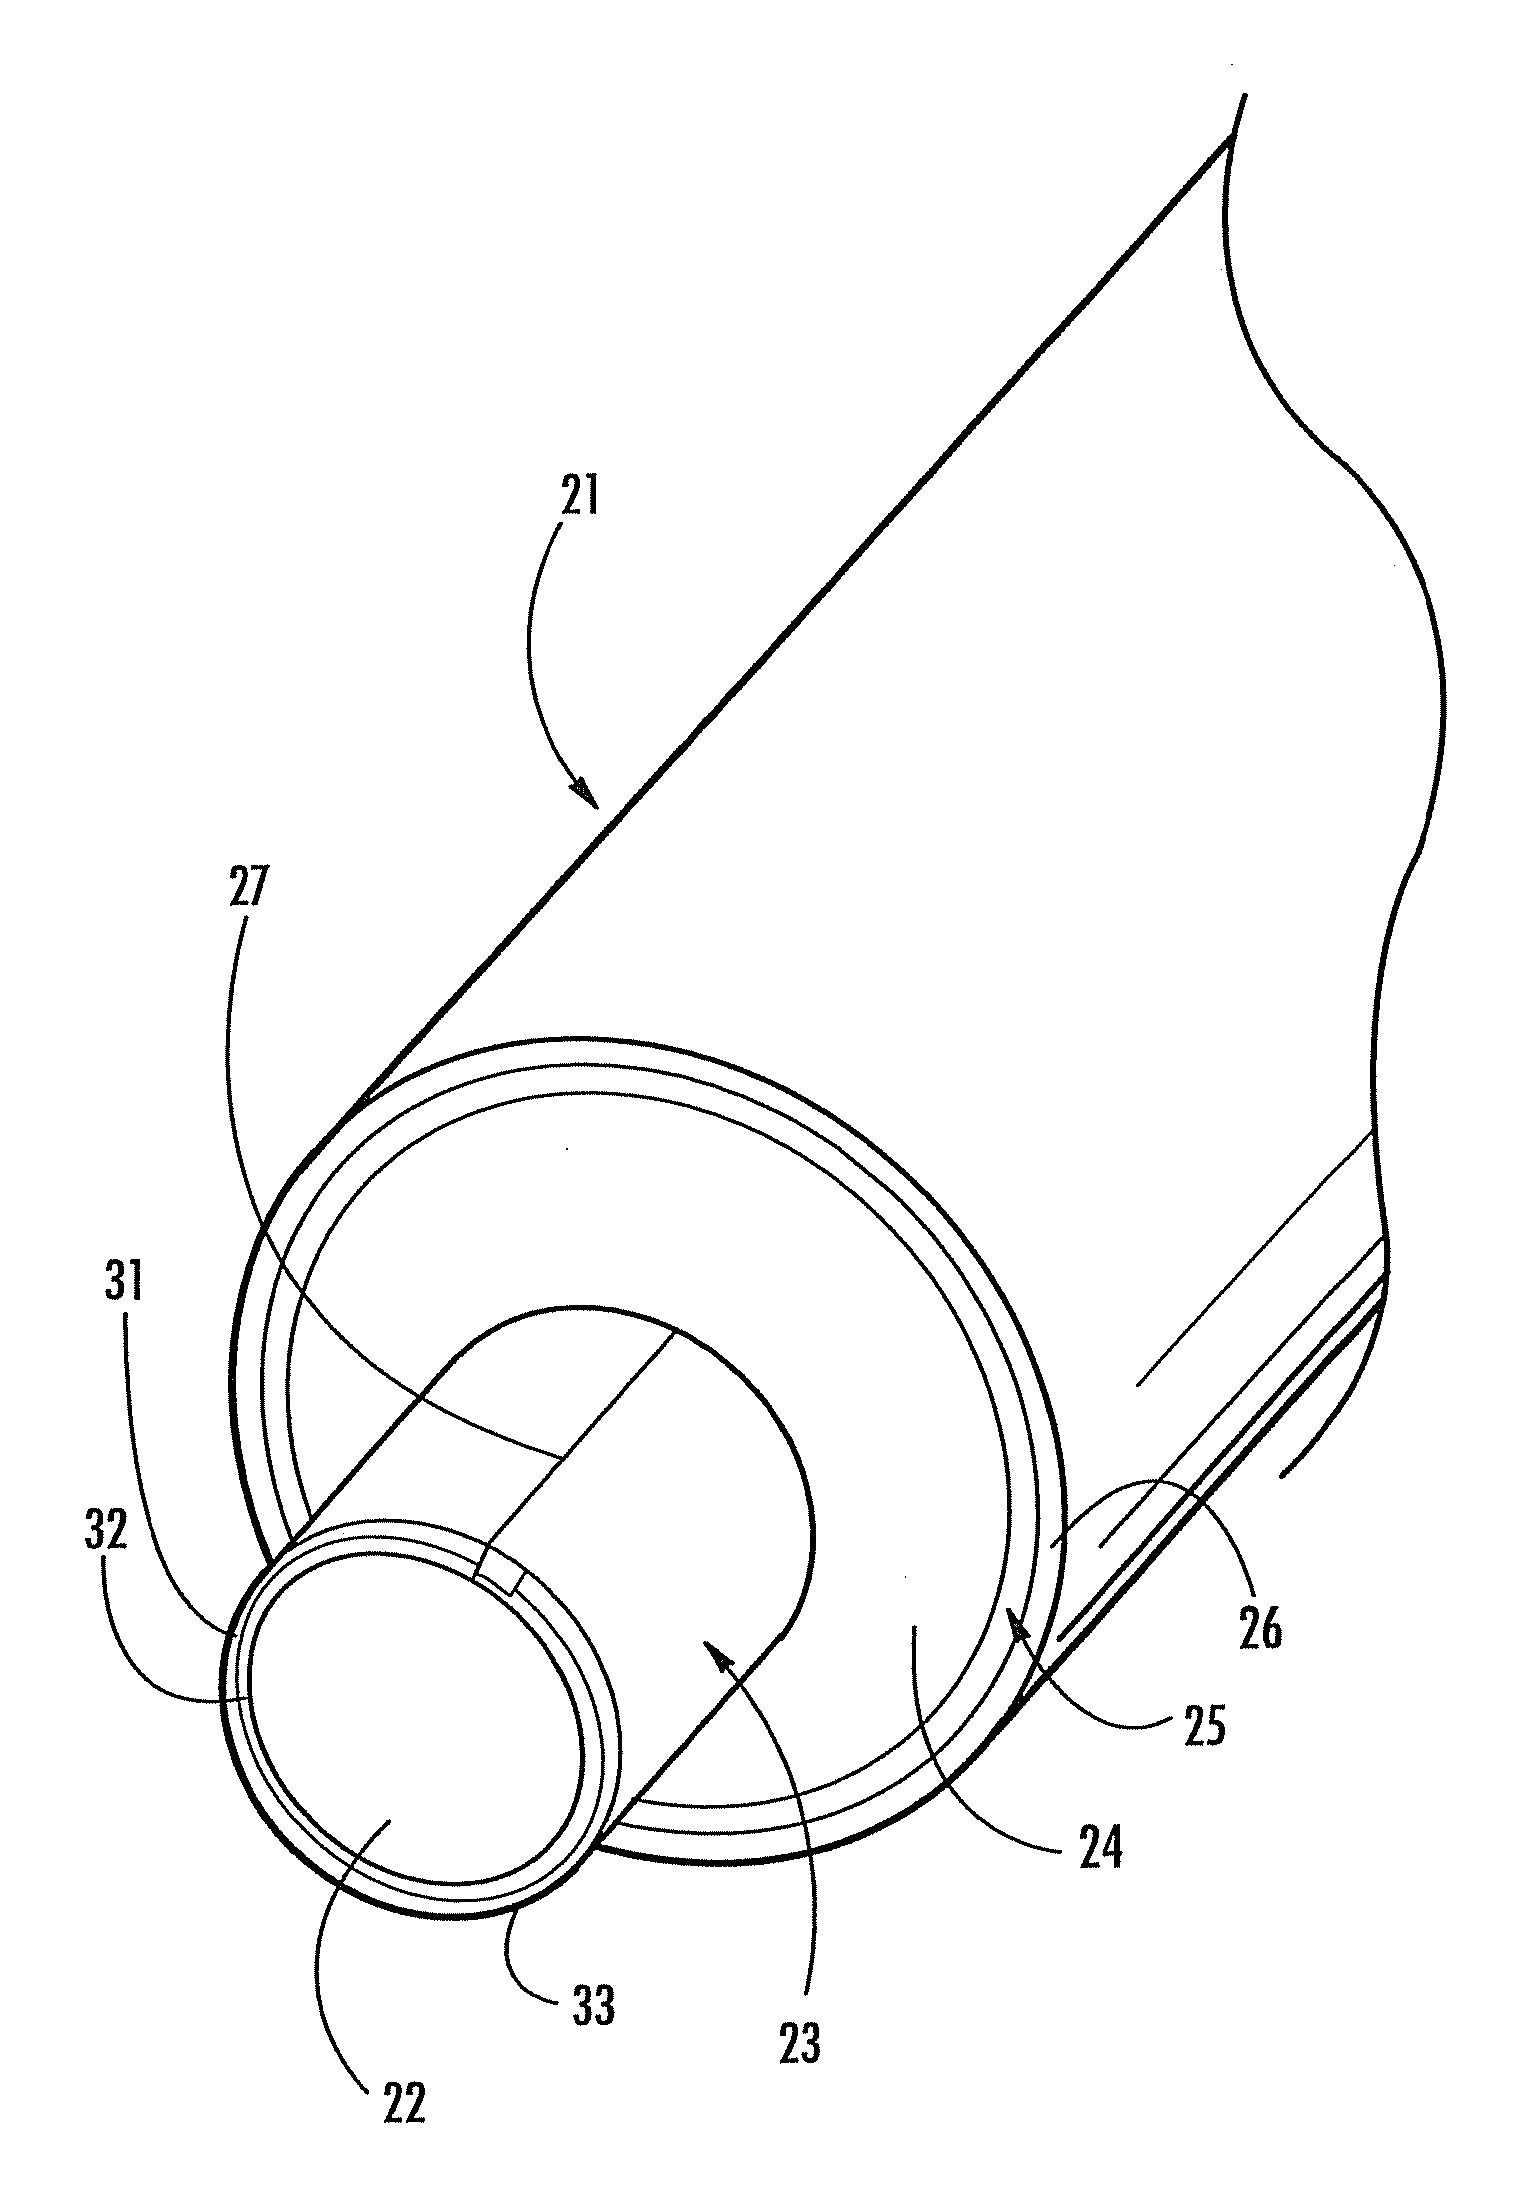 Method of making a coaxial cable including tubular bimetallic inner layer with folded over edge portions